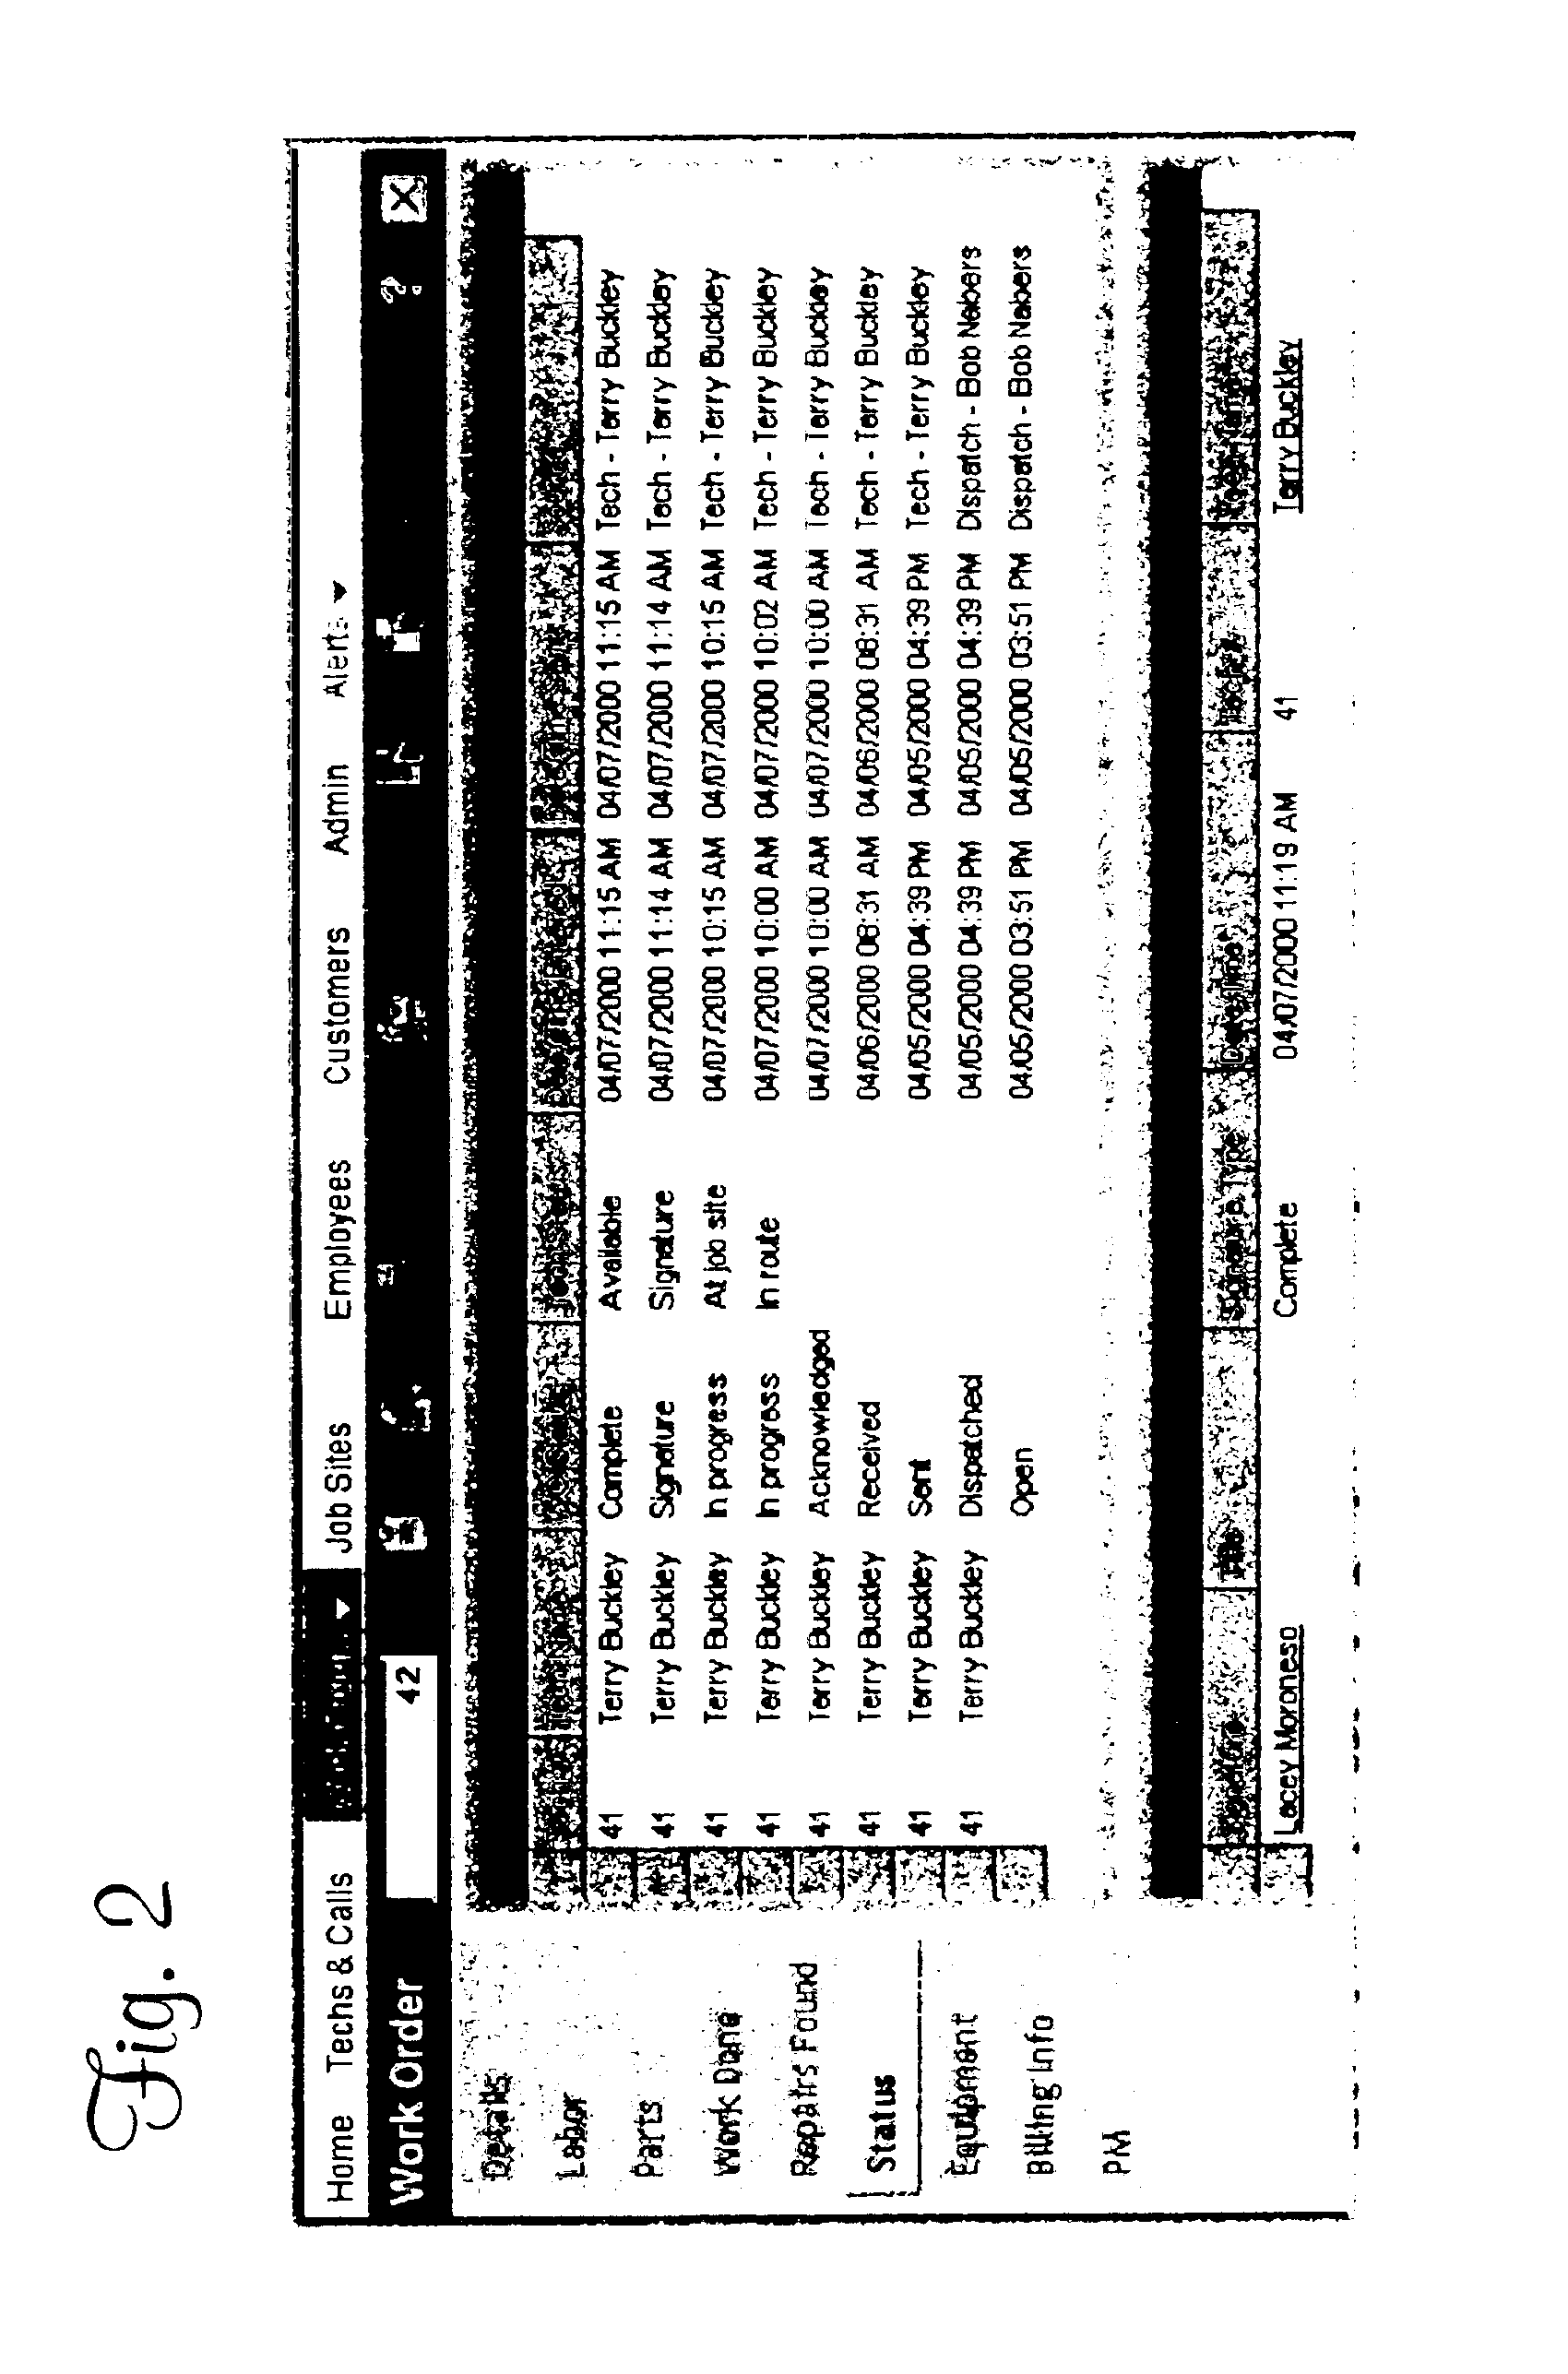 Method and systems for wireless communication for a field service system